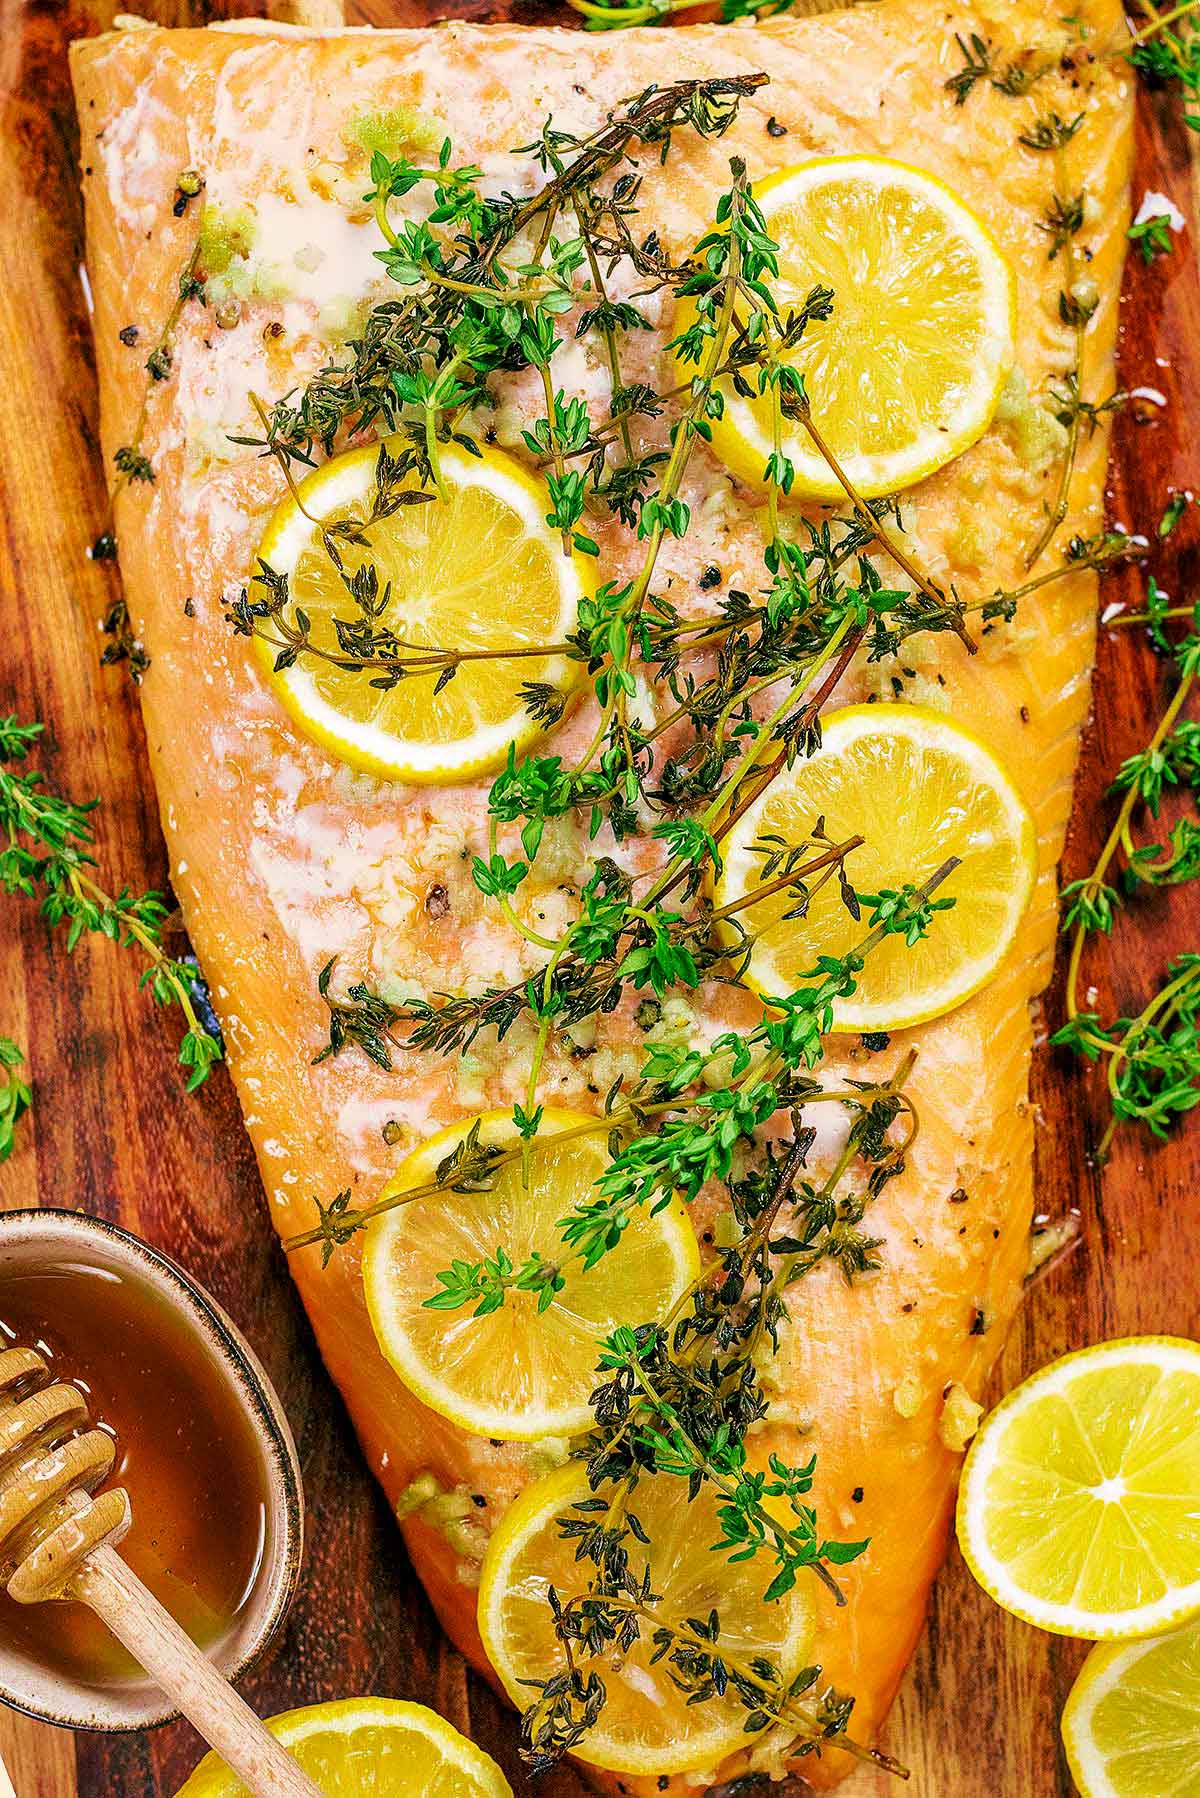 Cooked side of salmon with lemon slices and sprigs of thyme on it.